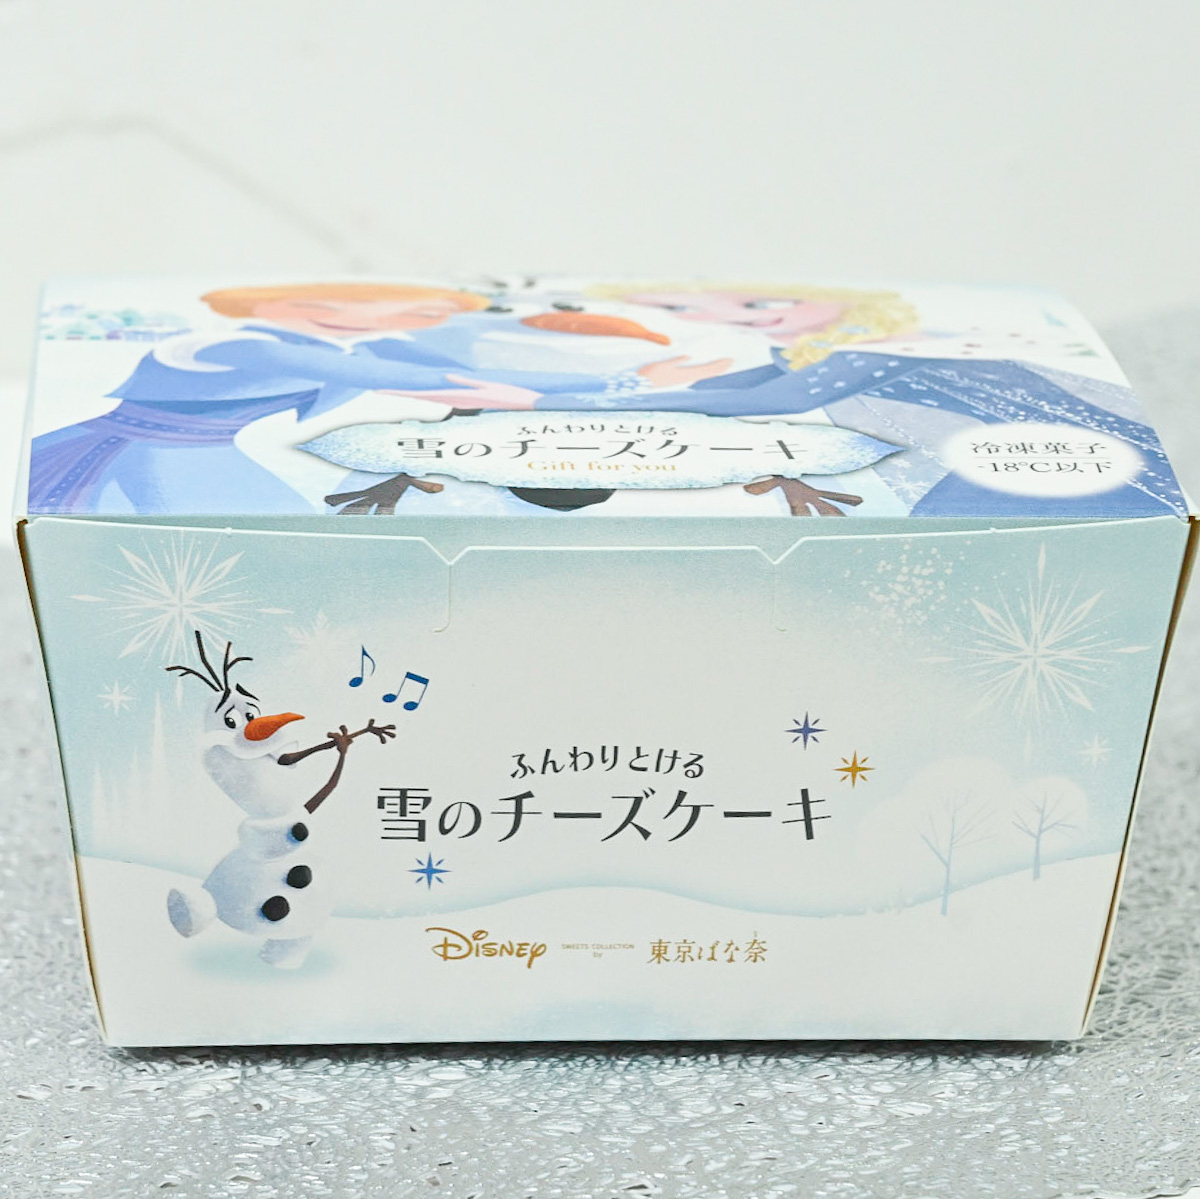 「Disney SWEETS COLLECTION by 東京ばな奈｣パッケージサイド